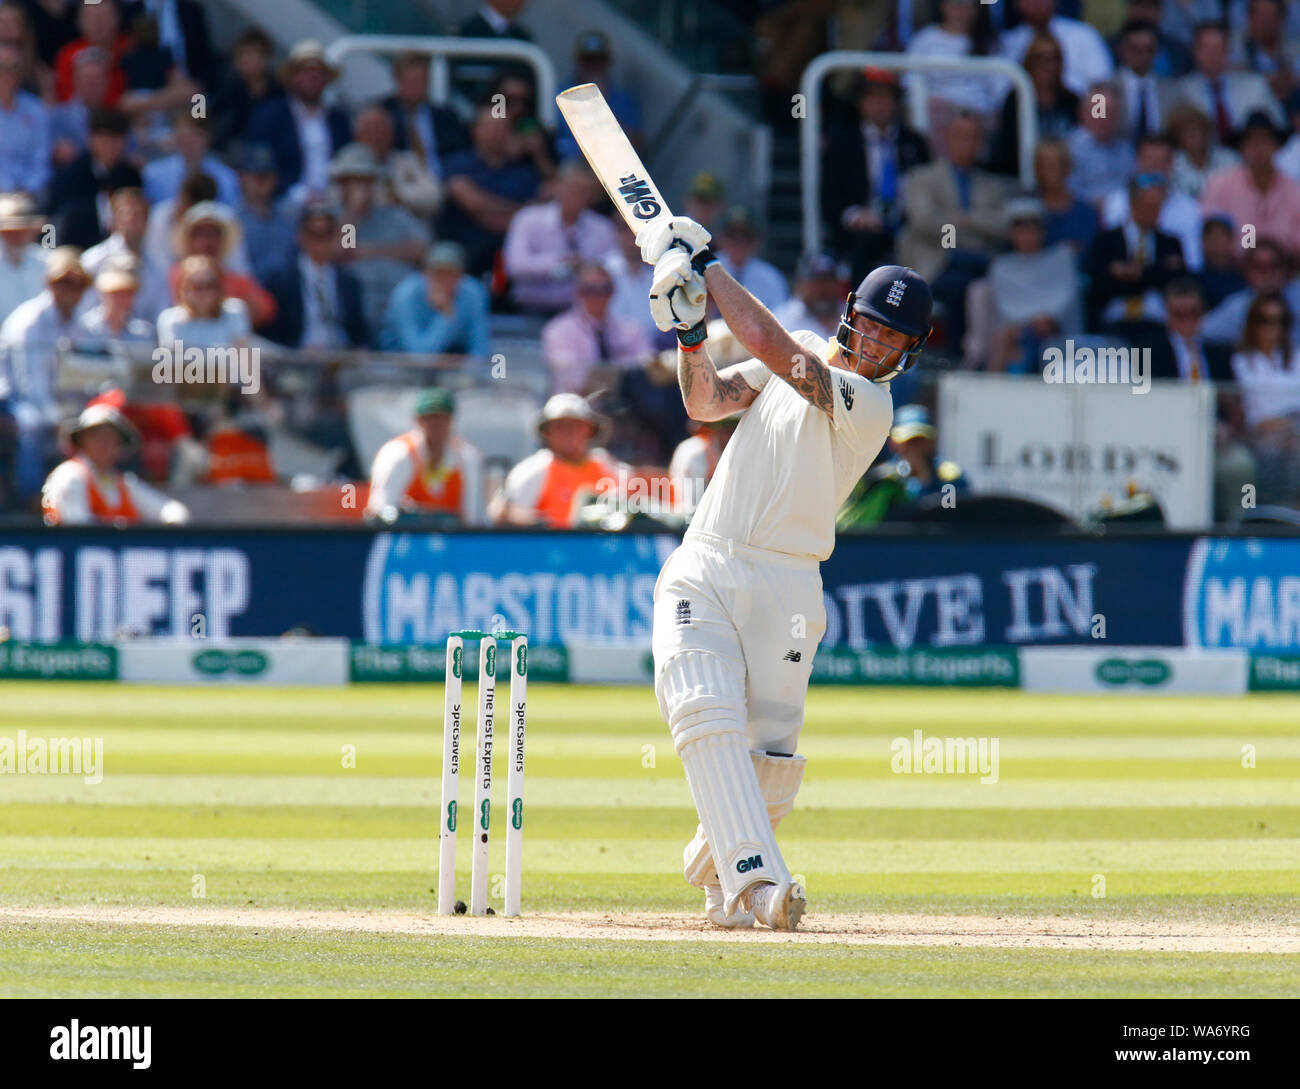 London, UK. 18 August 2019. Ben Stokes of England during play on the 5th day of the second Ashes cricket Test match between England and Australia at Lord's Cricket ground in London, England on August 18, 2019 Credit: Action Foto Sport/Alamy Live News Stock Photo